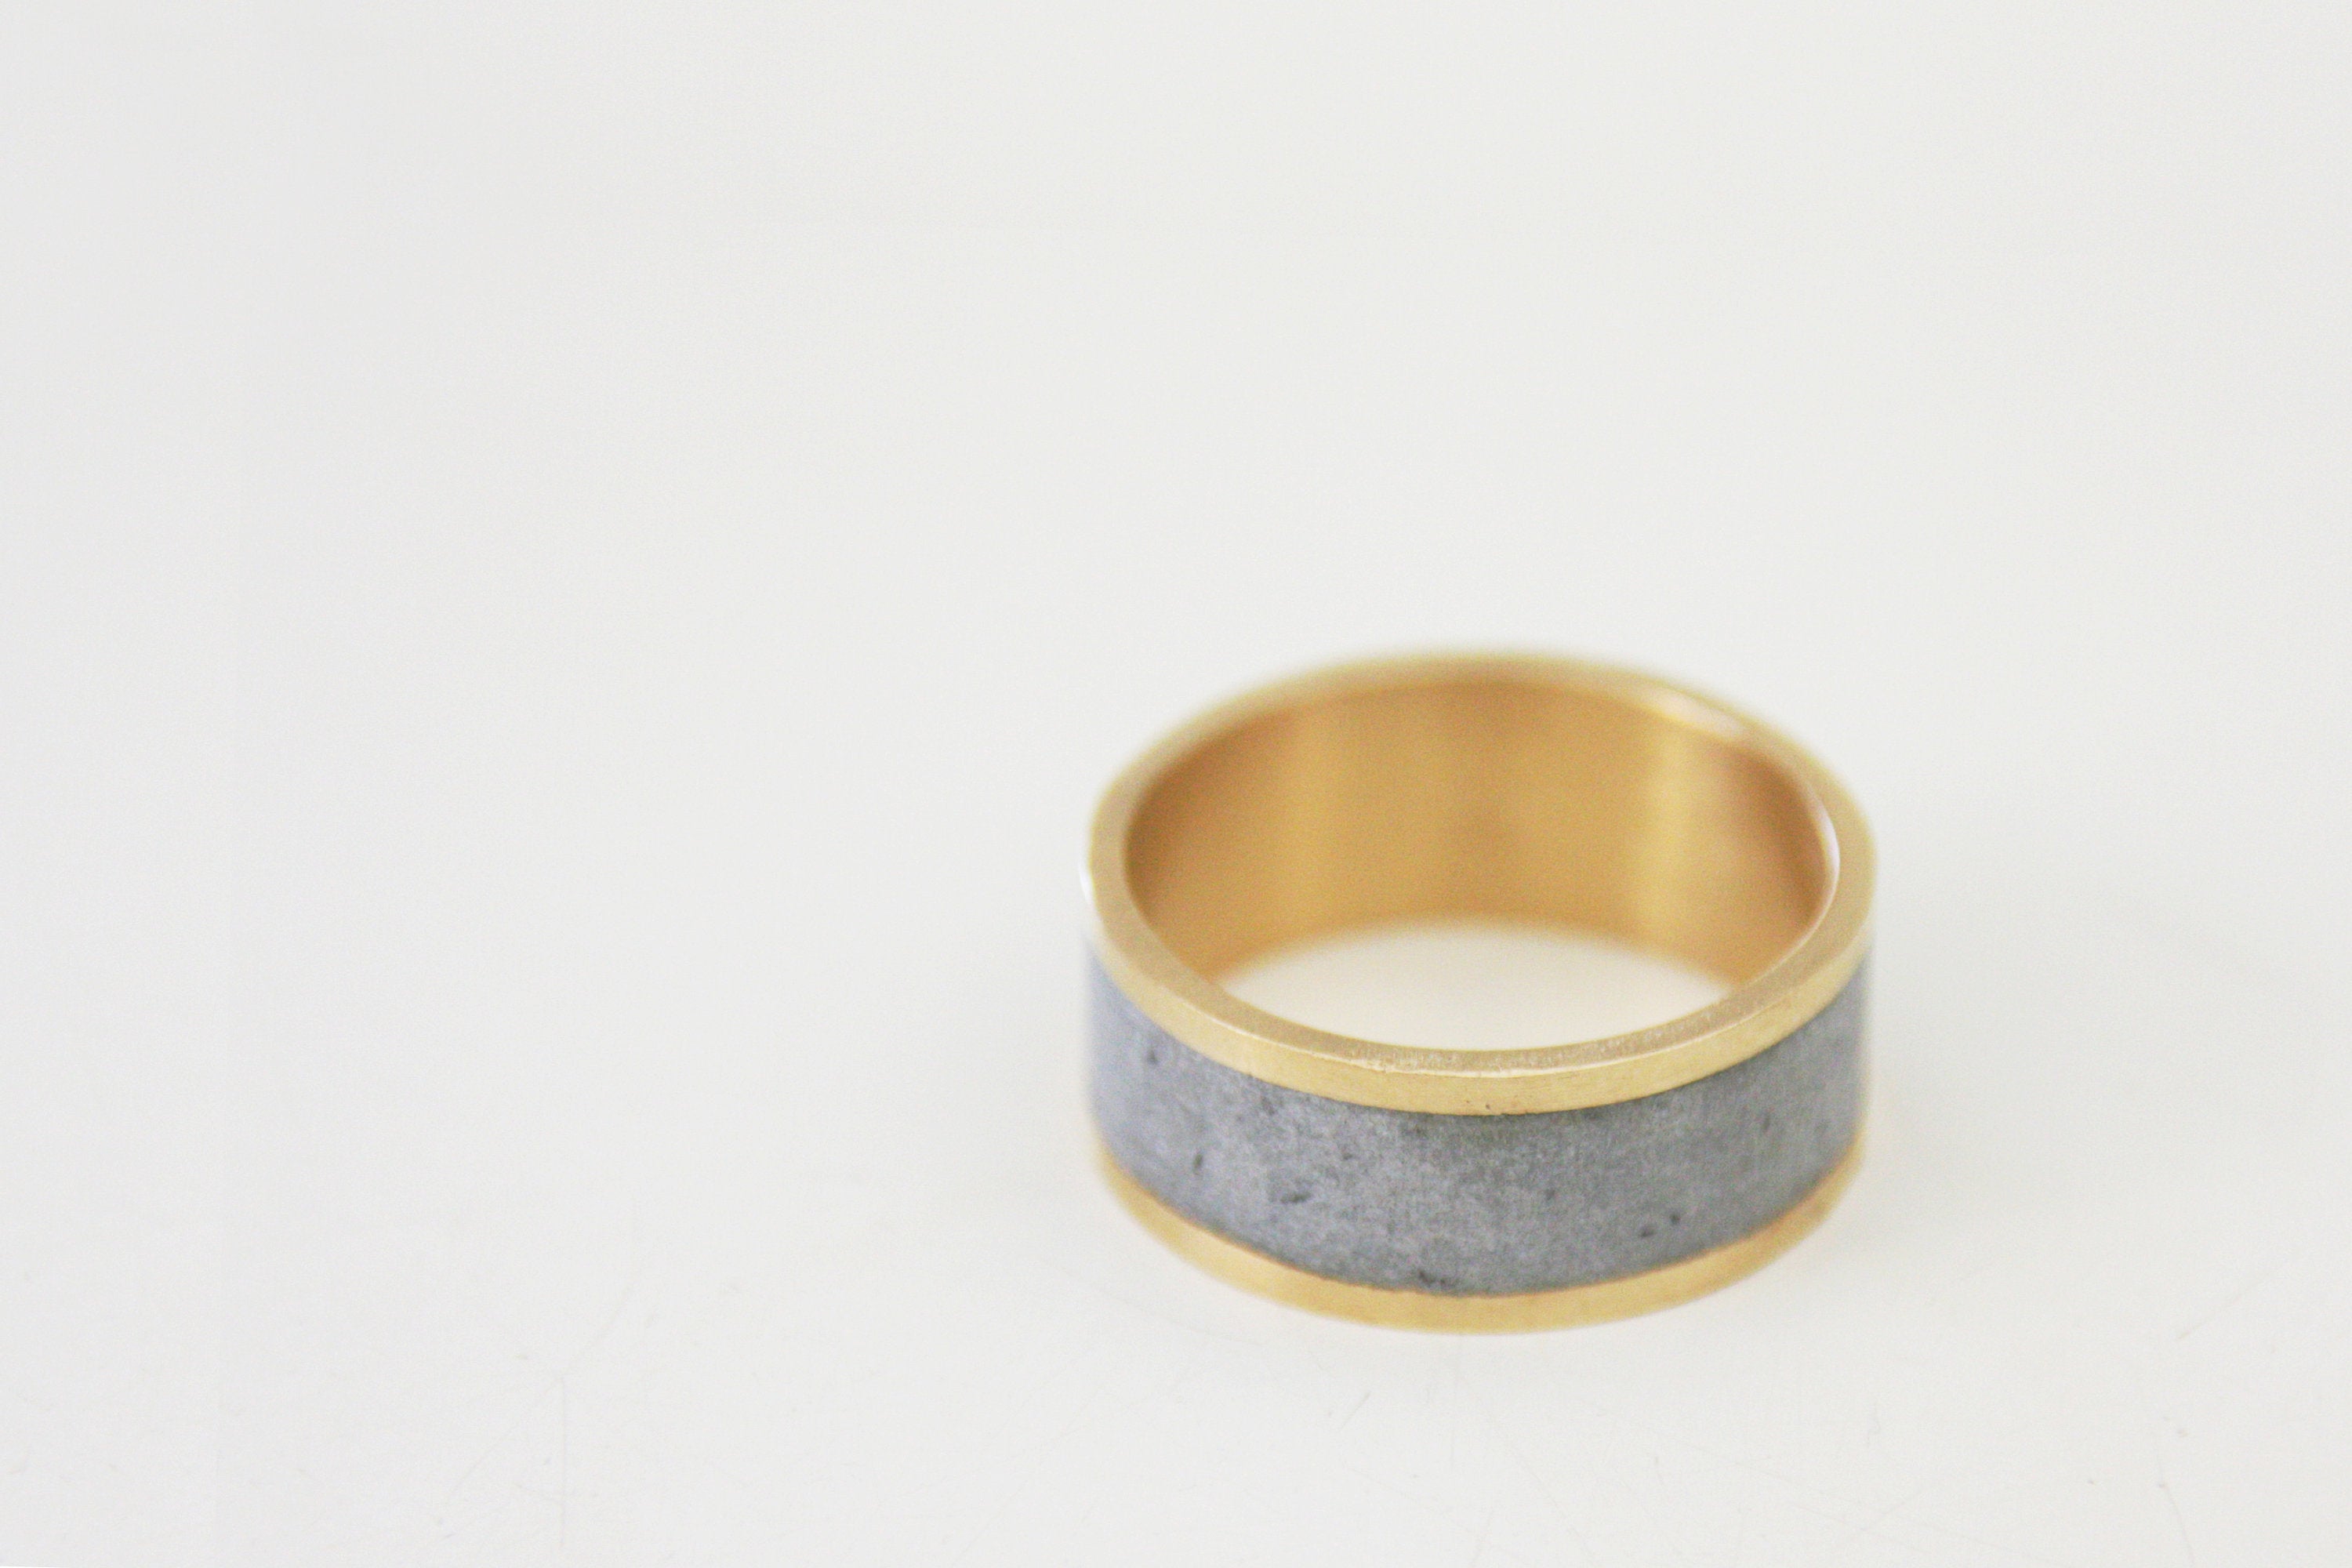 Concrete And Silver Minimalist Wide Wedding Band / Unisex Contemporary 925 Wedding Ring - hs